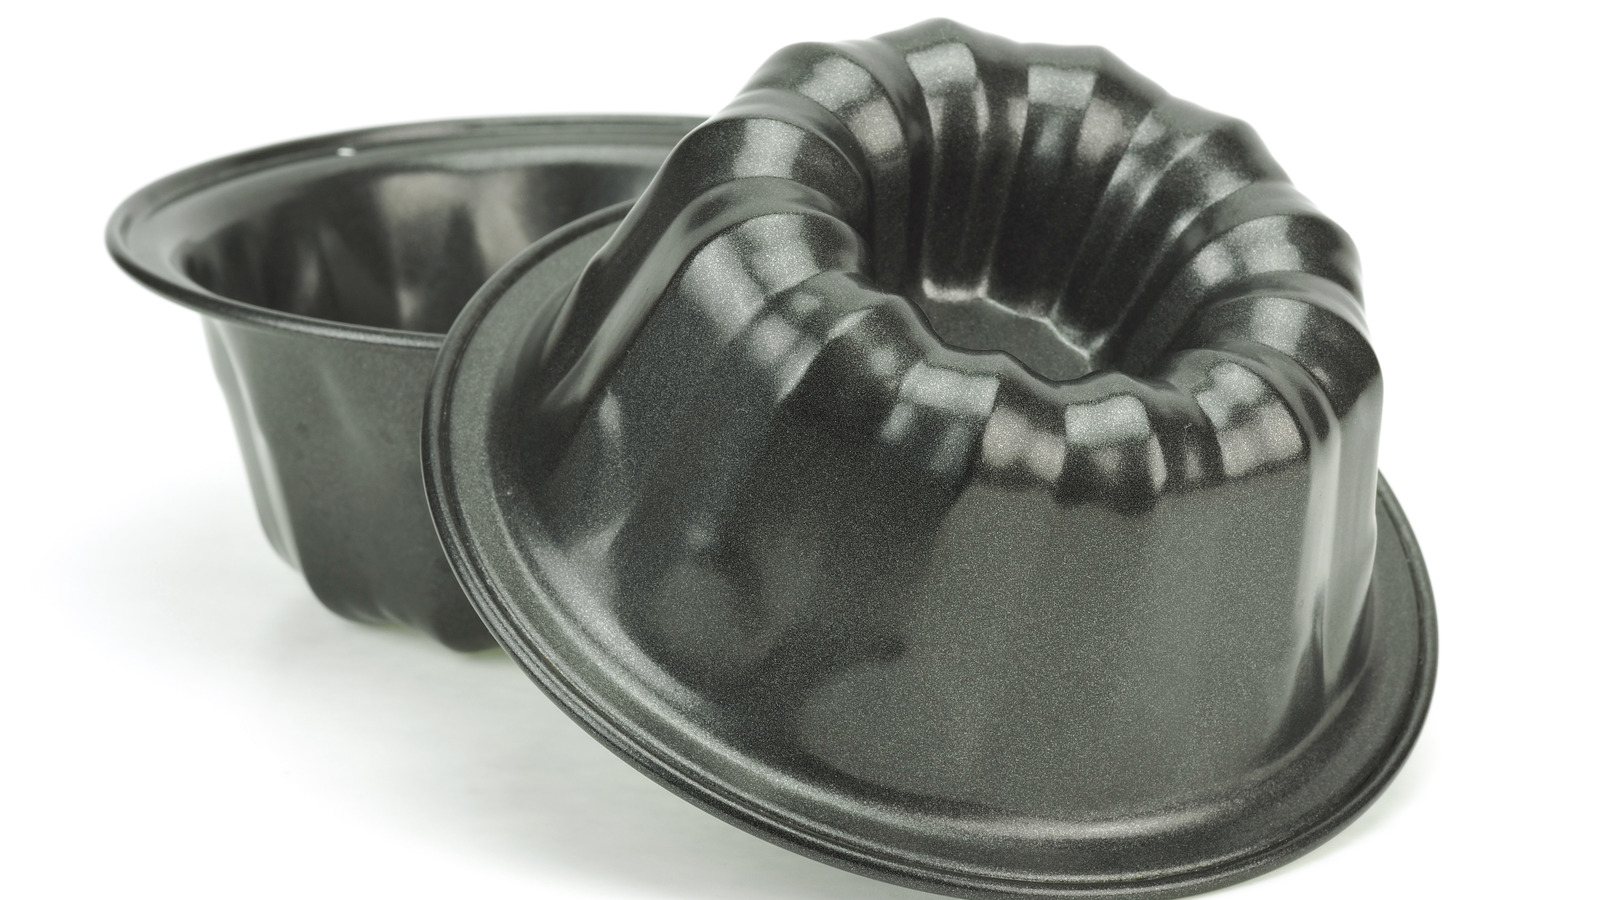 The Real Difference Between A Bundt Pan And A Tube Pan